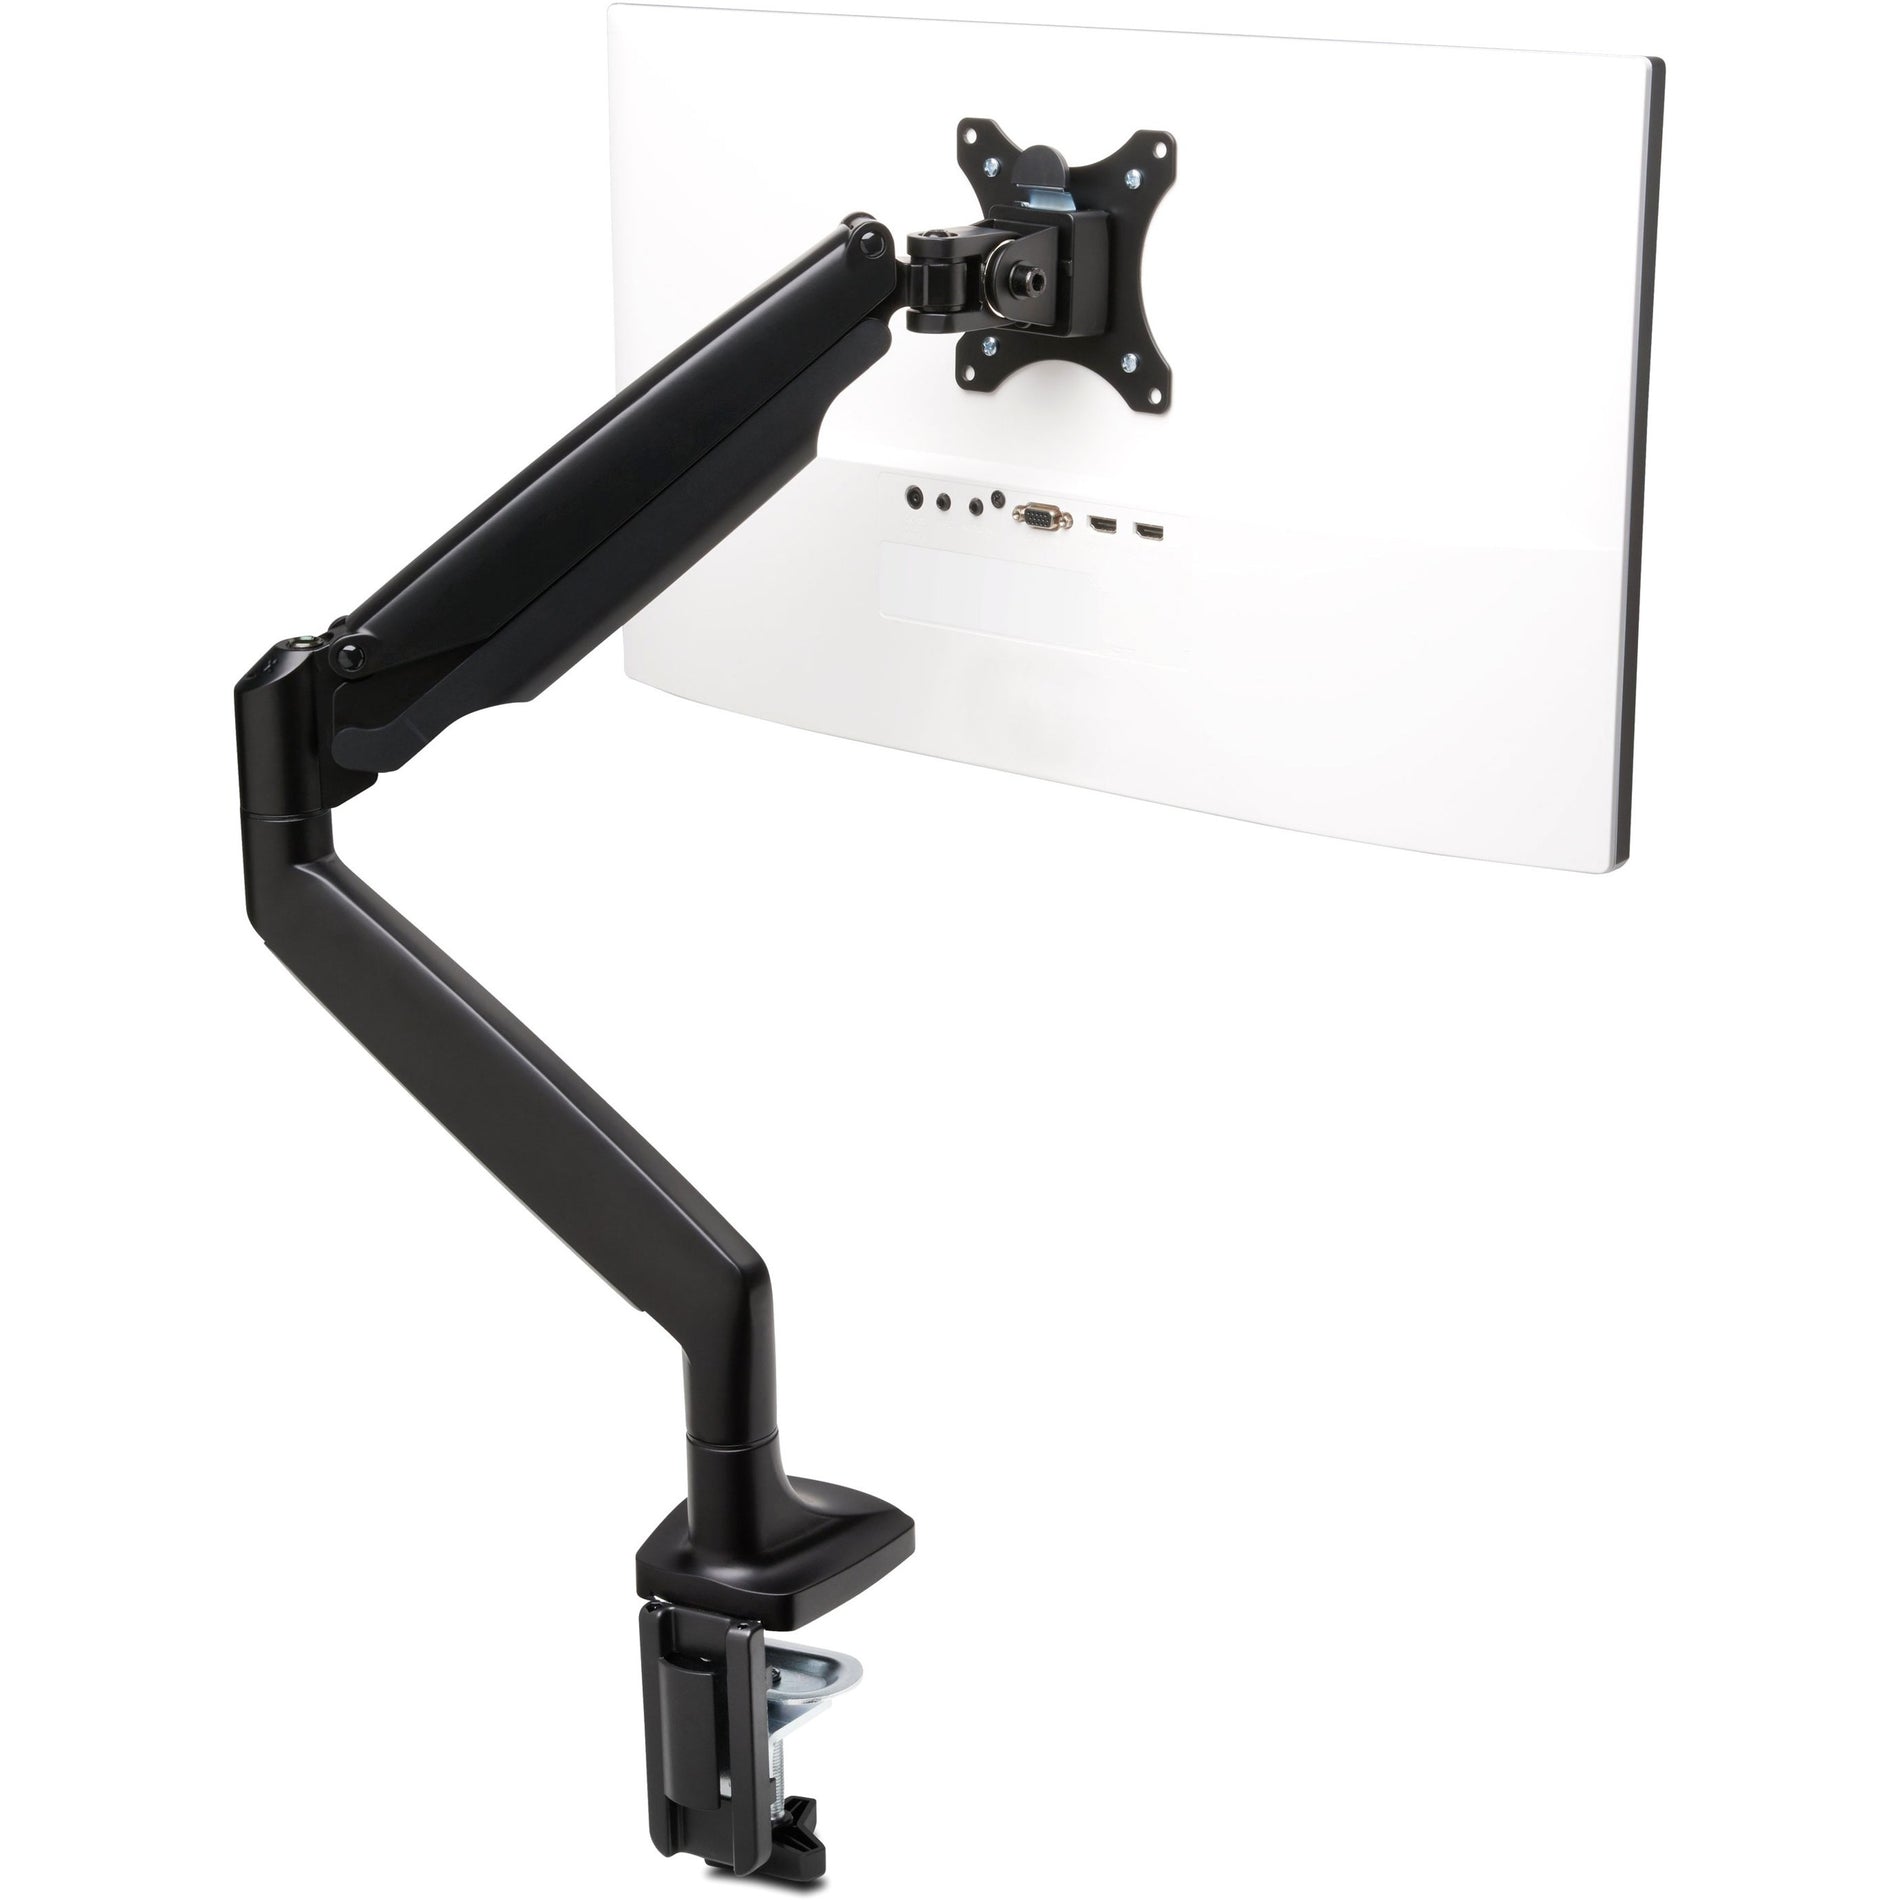 Kensington K59600WW SmartFit One-Touch Height Adjustable Single Monitor Arm, Black - Gas Spring, Articulating, Cable Management